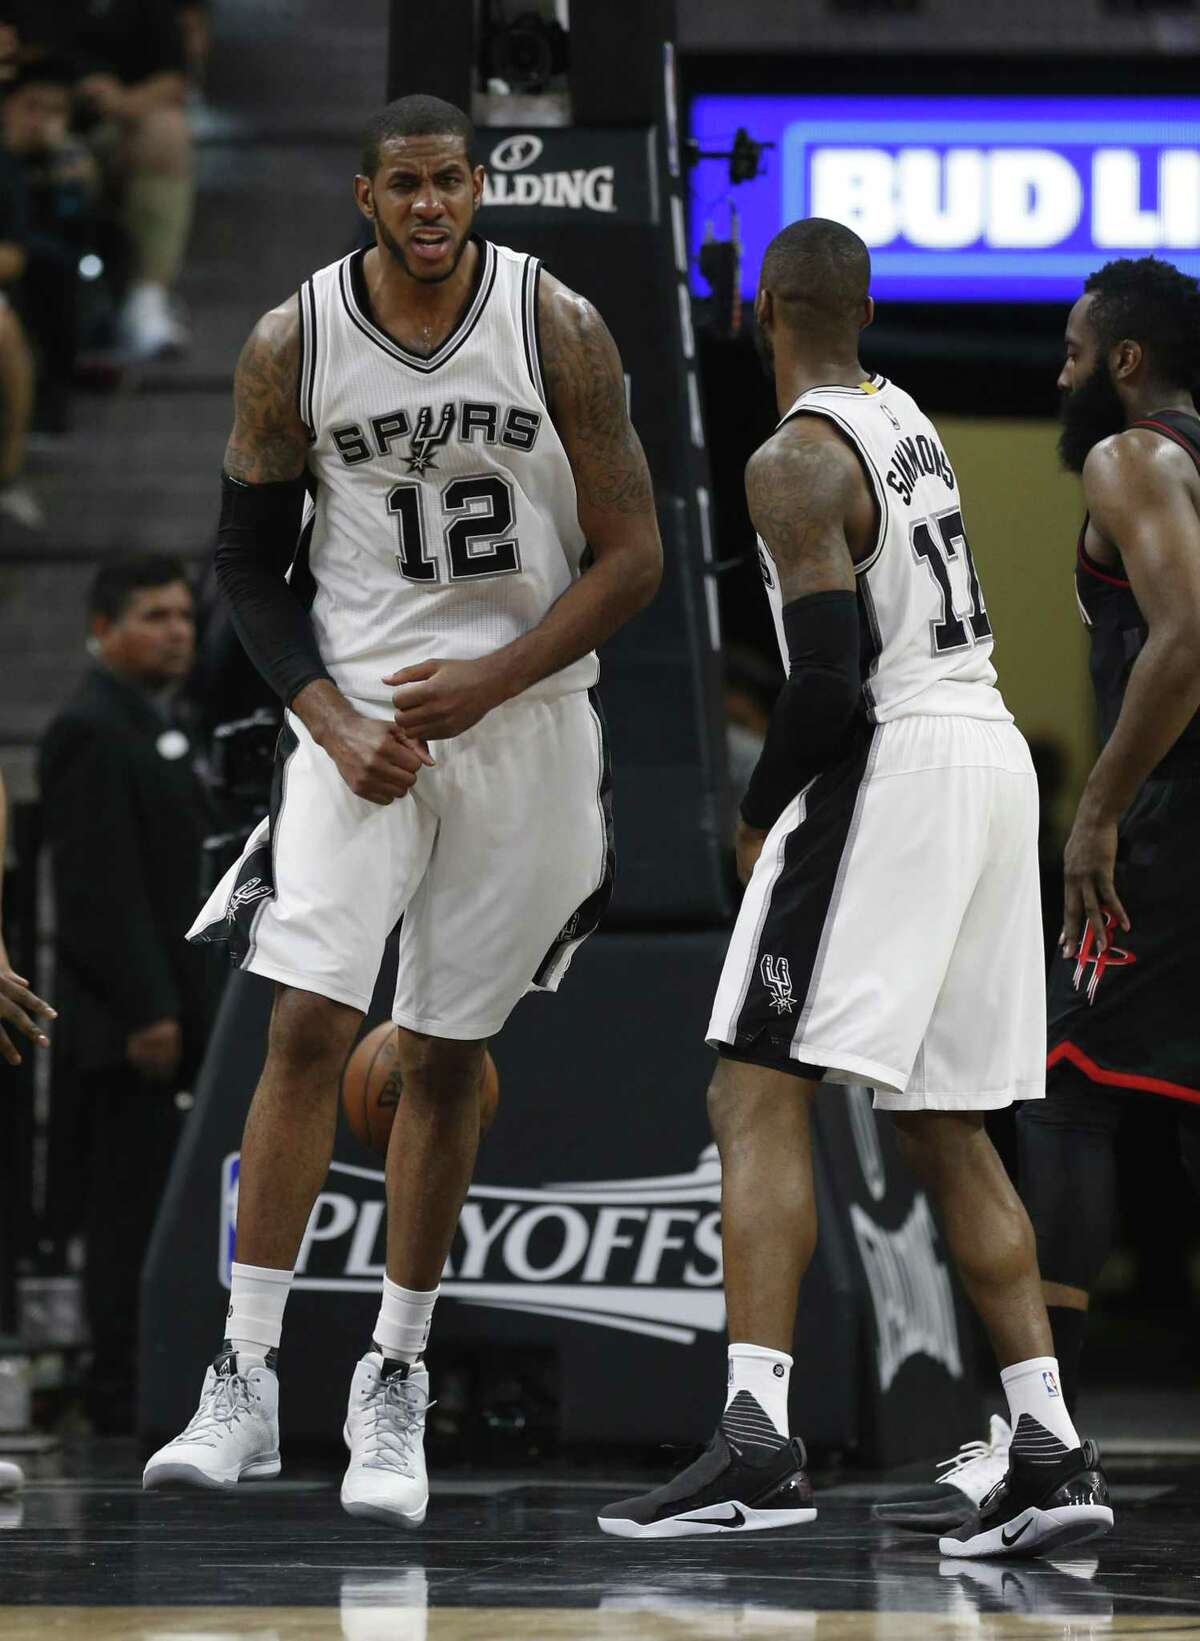 Spurs’ LaMarcus Aldridge (12) reacts after making a bucket with Jonathon Simmons against the Rockets in Game 5 at the AT&T Center on May 9, 2017.